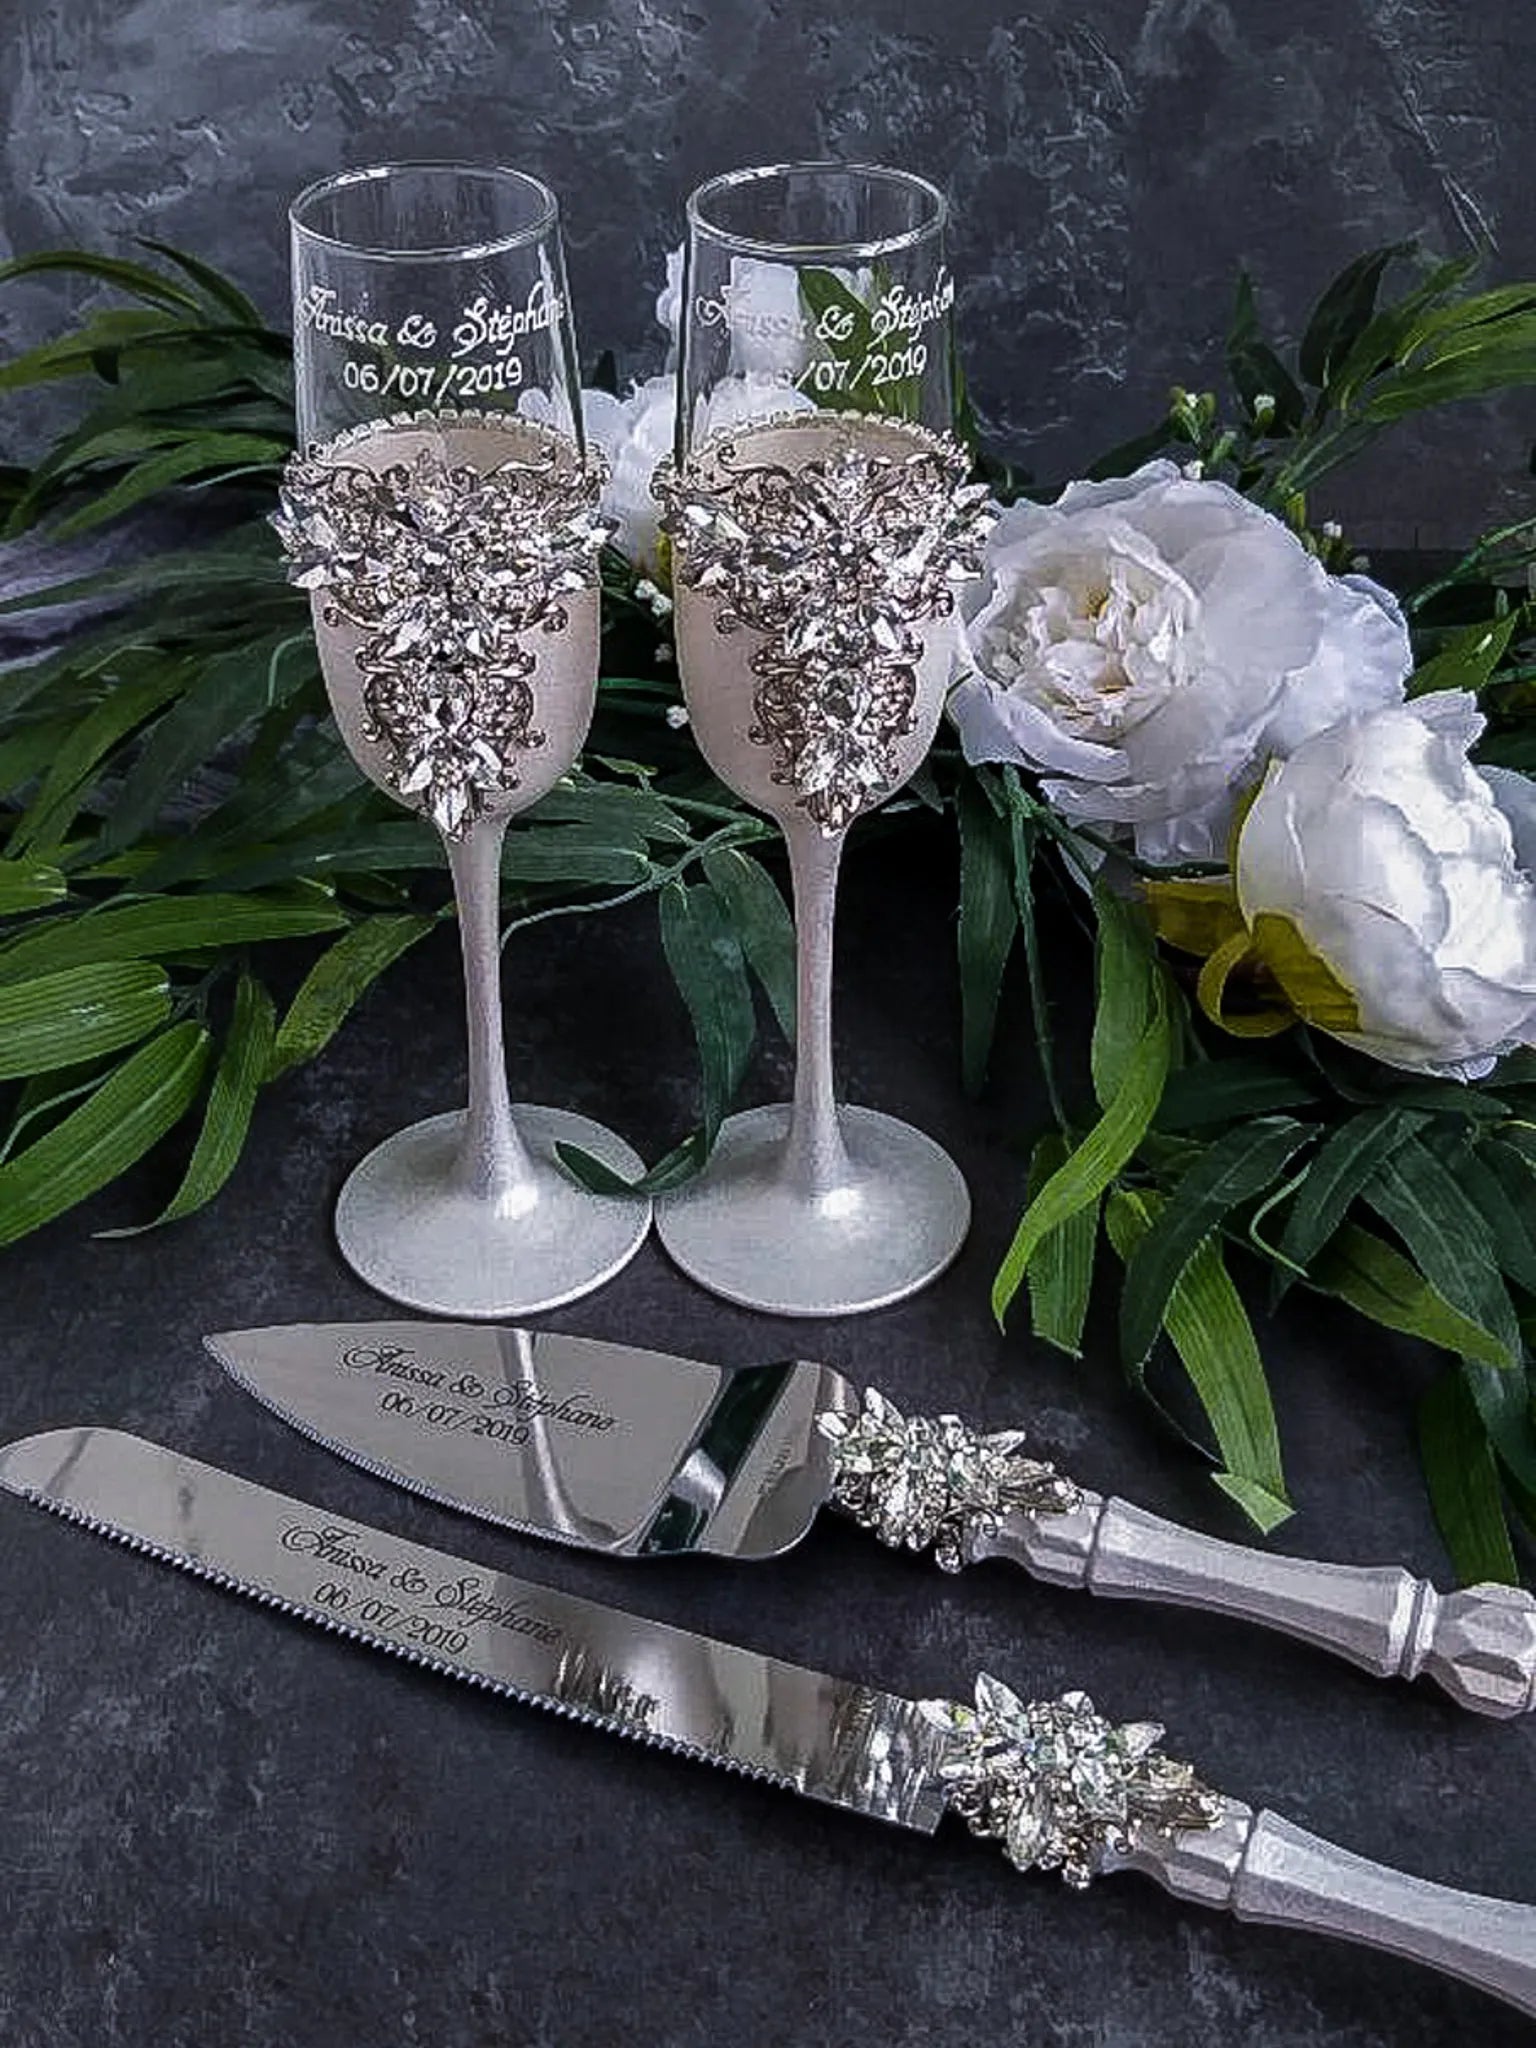 Engraved wedding toasting glasses with clear crystals